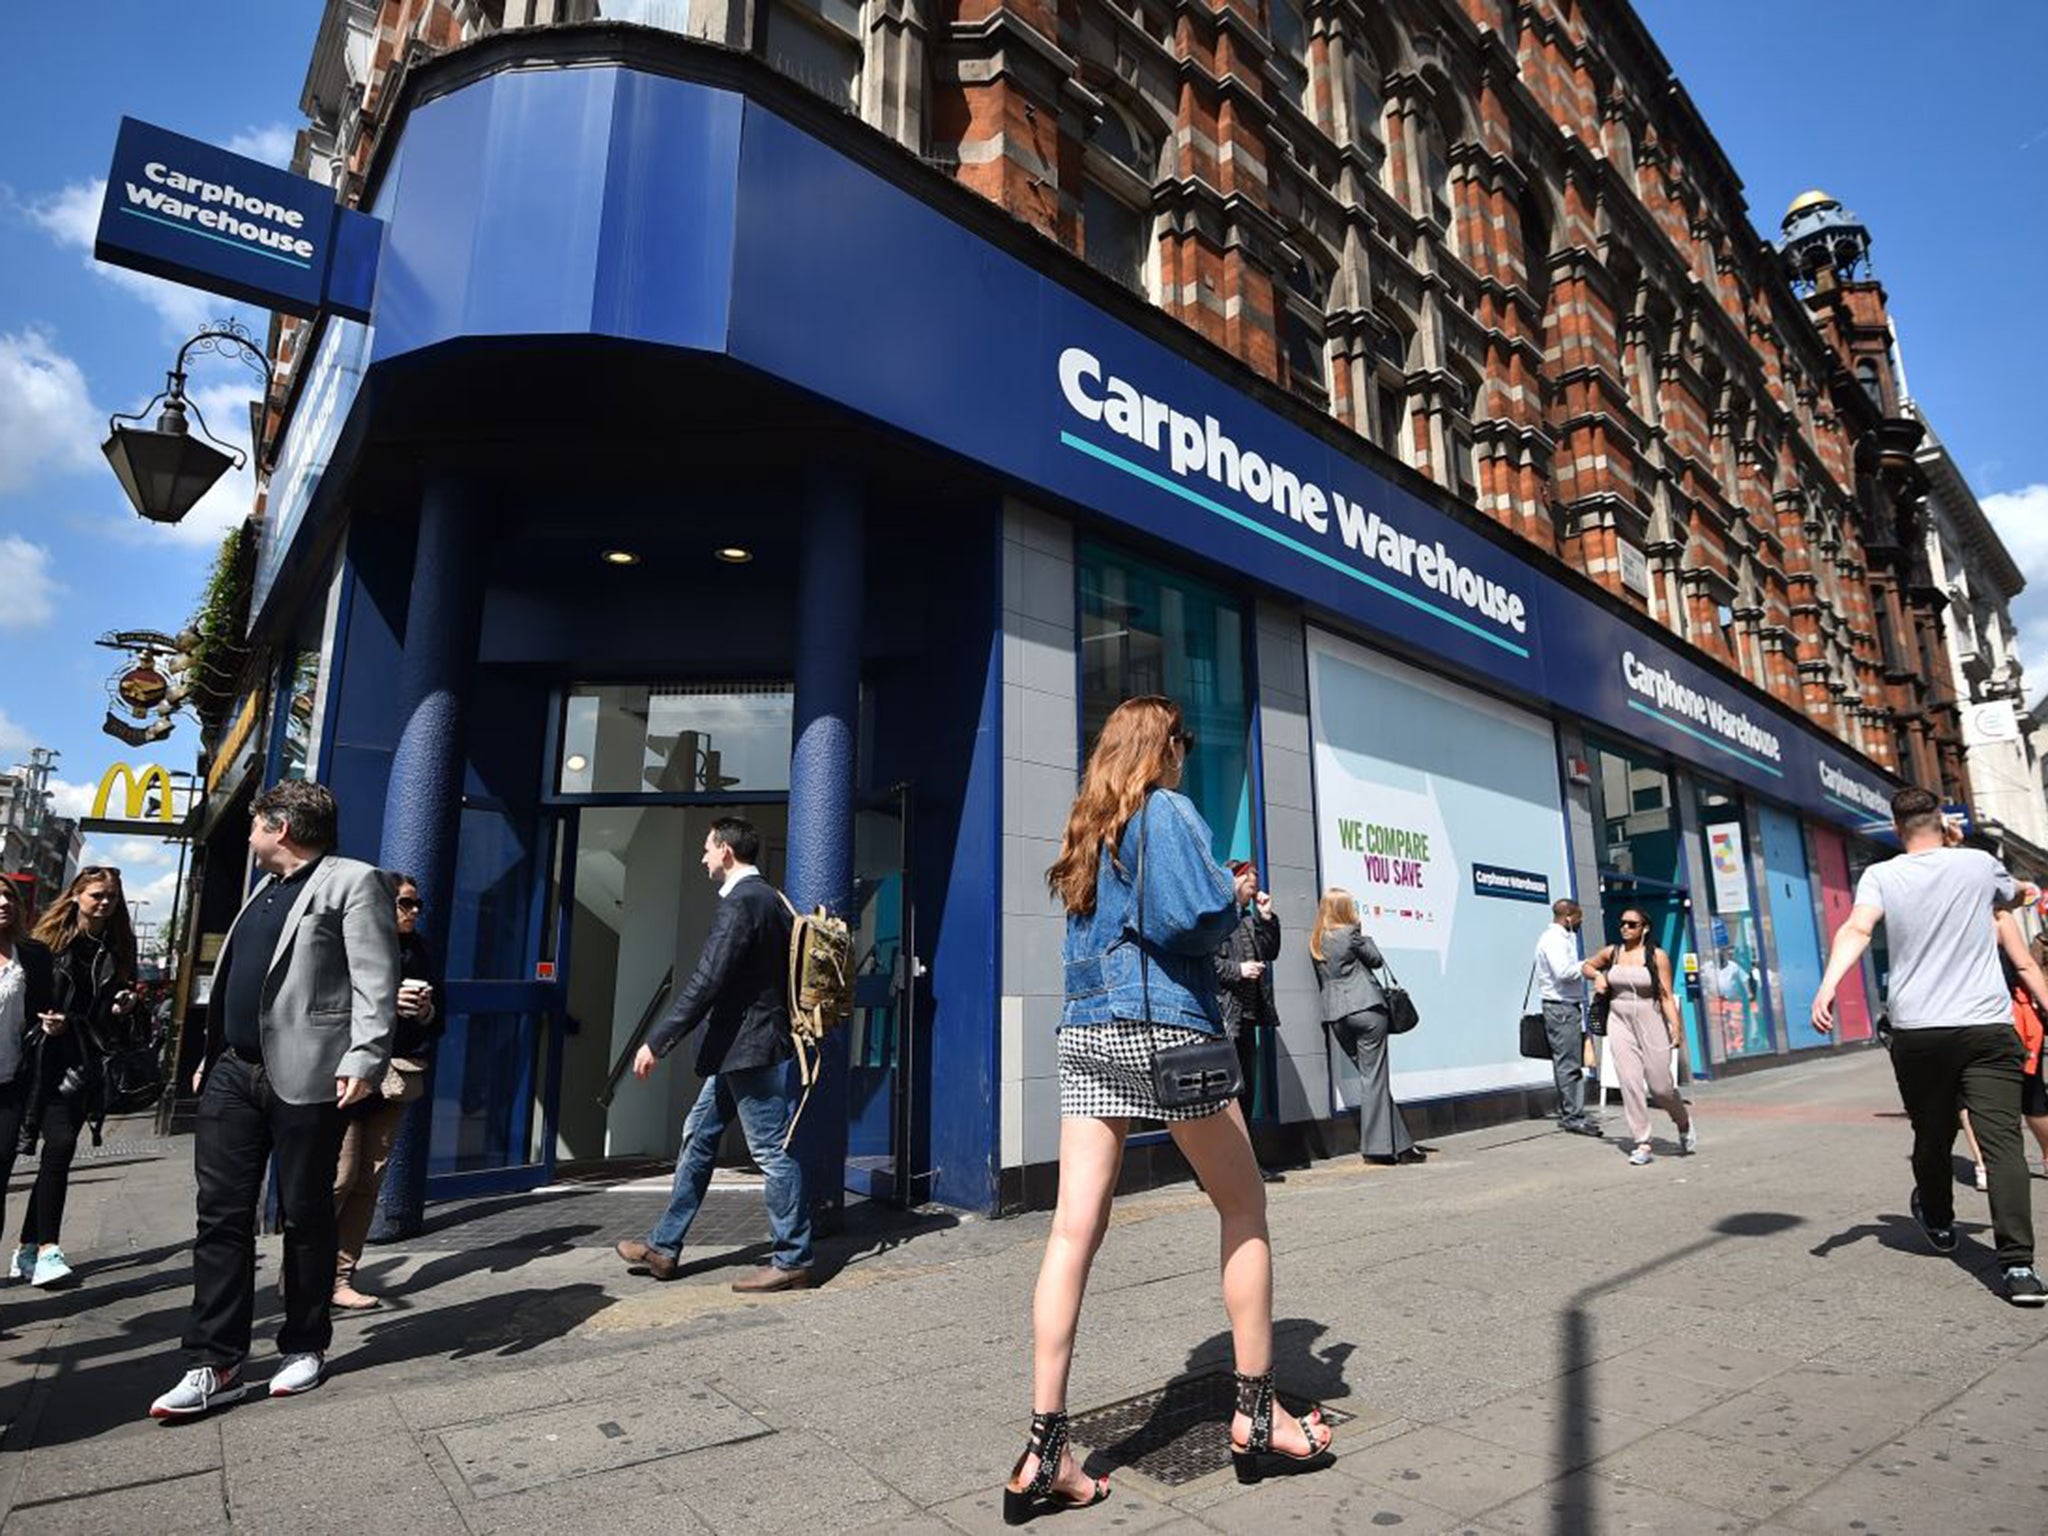 An unexpected forecast for a drop in annual profit in August hammered Dixons Carphone